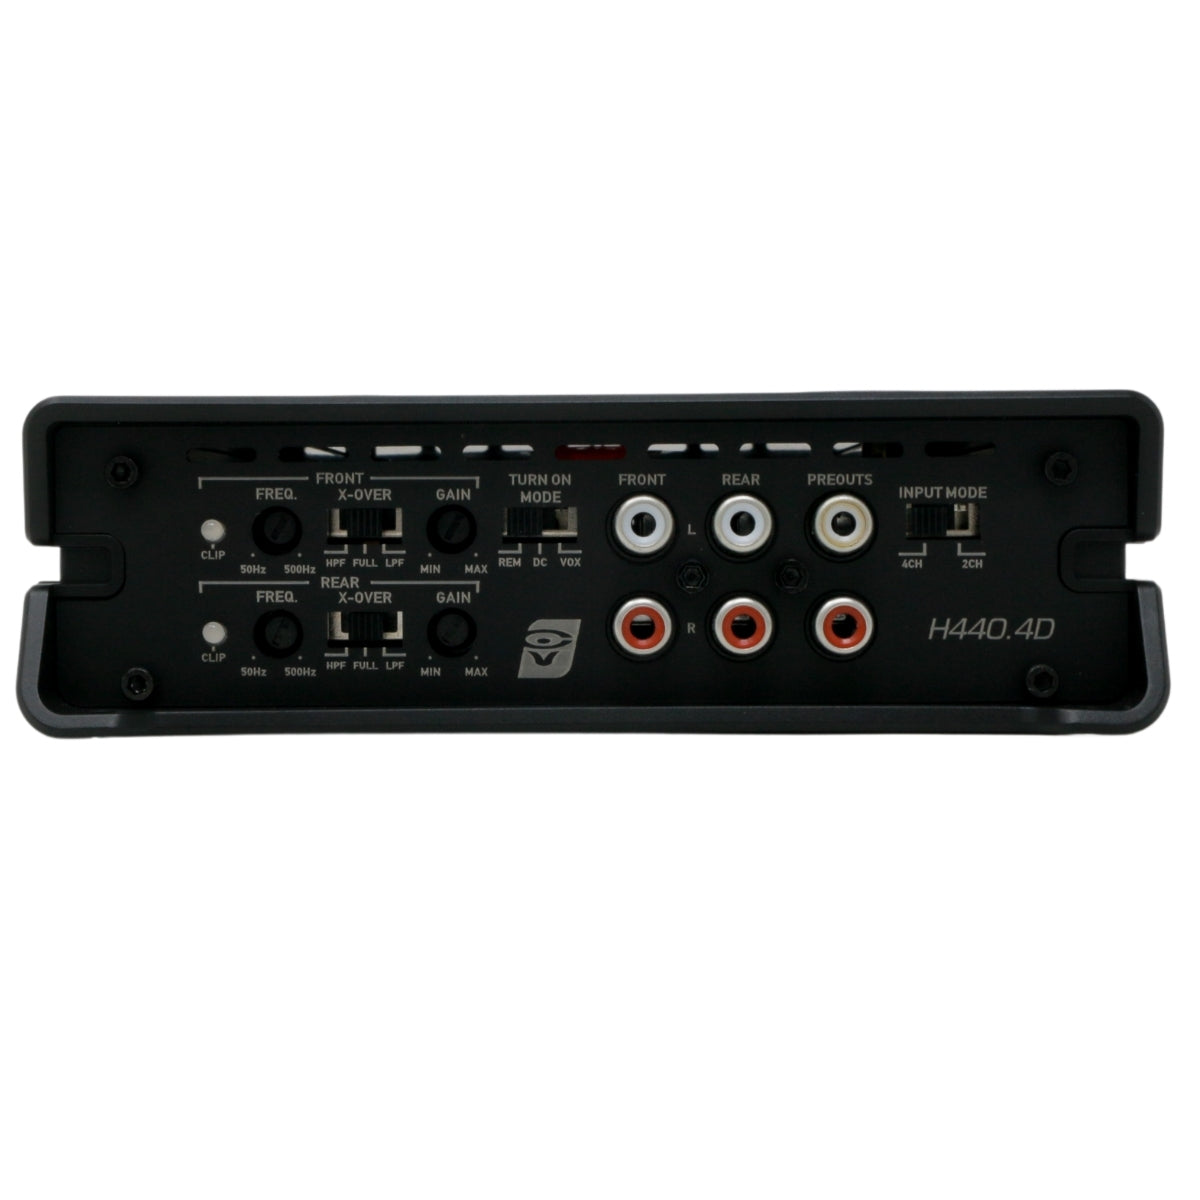 The image shows the control panel of a Cerwin Vega Inc. HED 440W RMS Full Range Class-D 4 Channel Digital Amplifier. This 4 Channel Full Range Digital Amplifier, featuring Class D amplifier technology, includes various knobs, switches, and input/output ports labeled "FREQ," "FRONT X-OVER," "GAIN," and more. The model name "H440.4D" is printed on the bottom right.